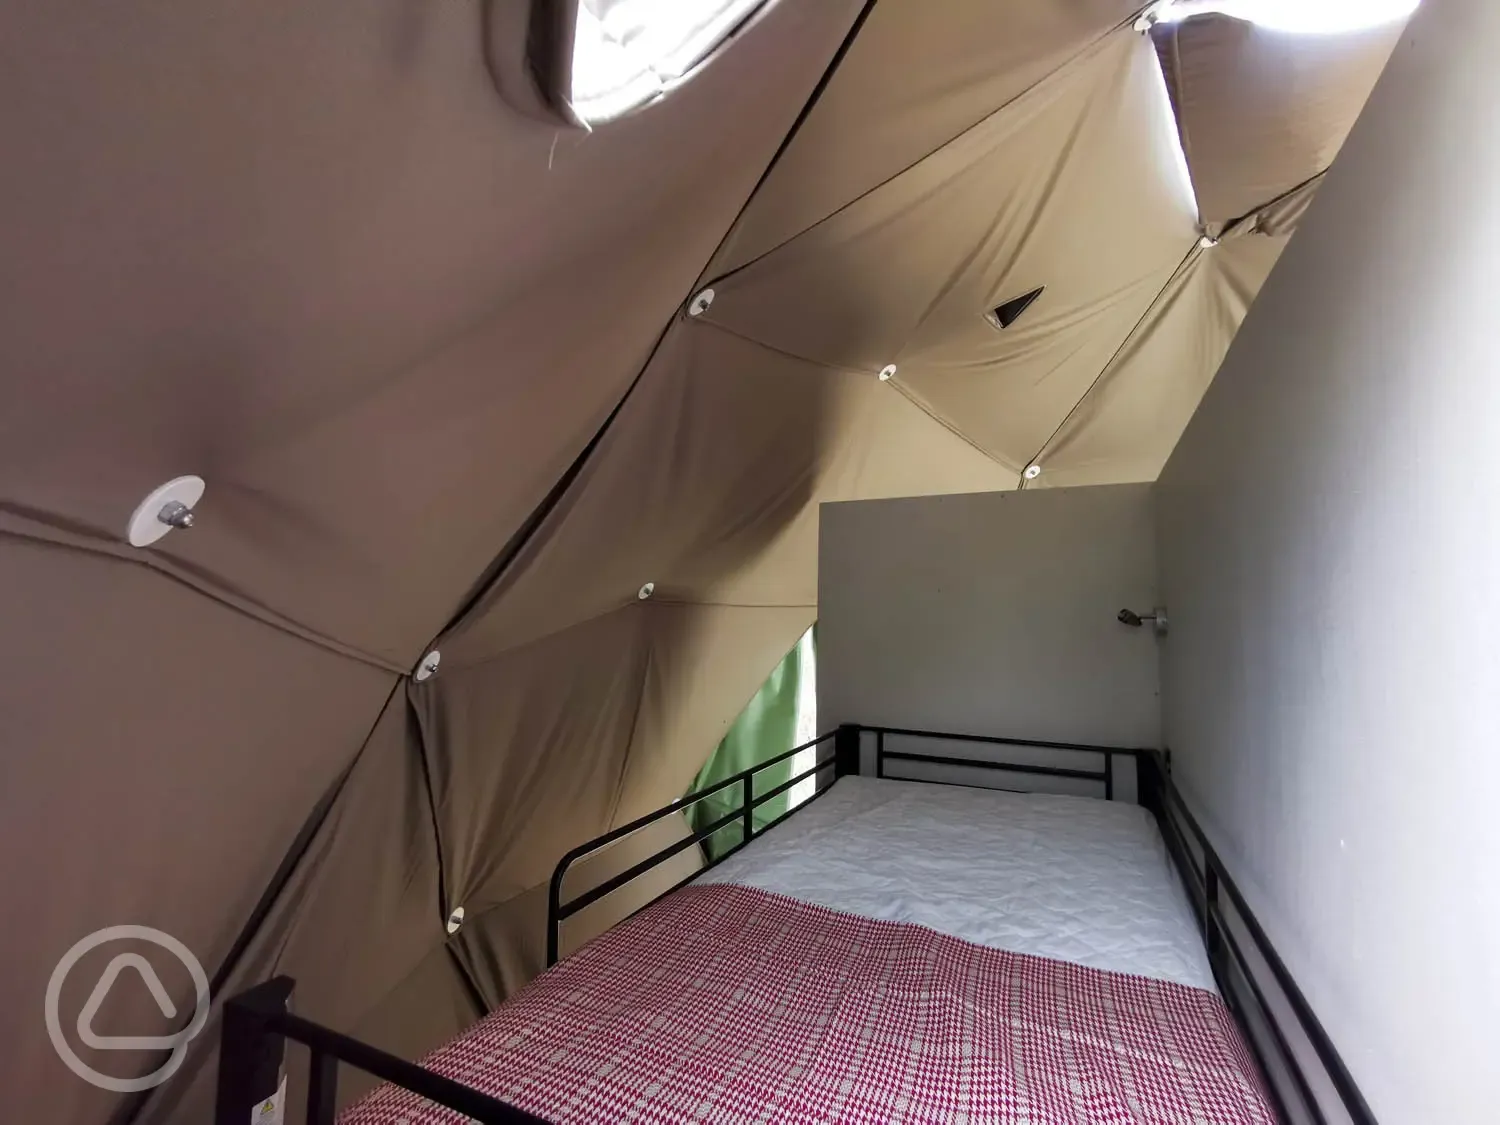 Interior of Willow Geodesic Dome